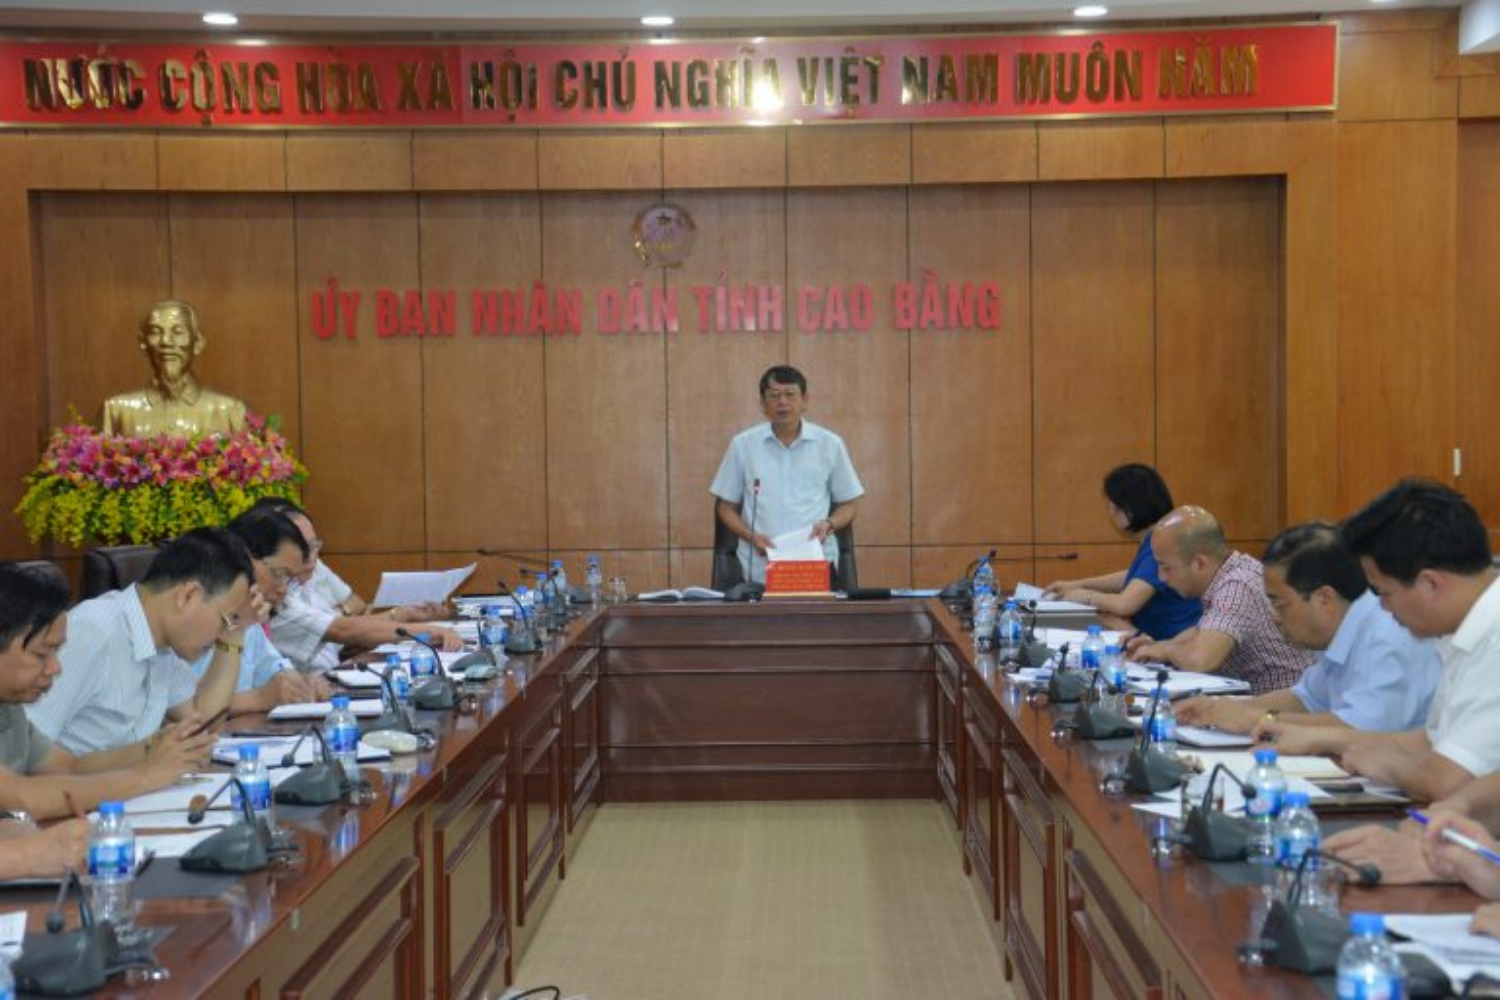 Chairman of People’s committee of Cao Bang province Mr.Hoang Xuan Anh closed the meeting